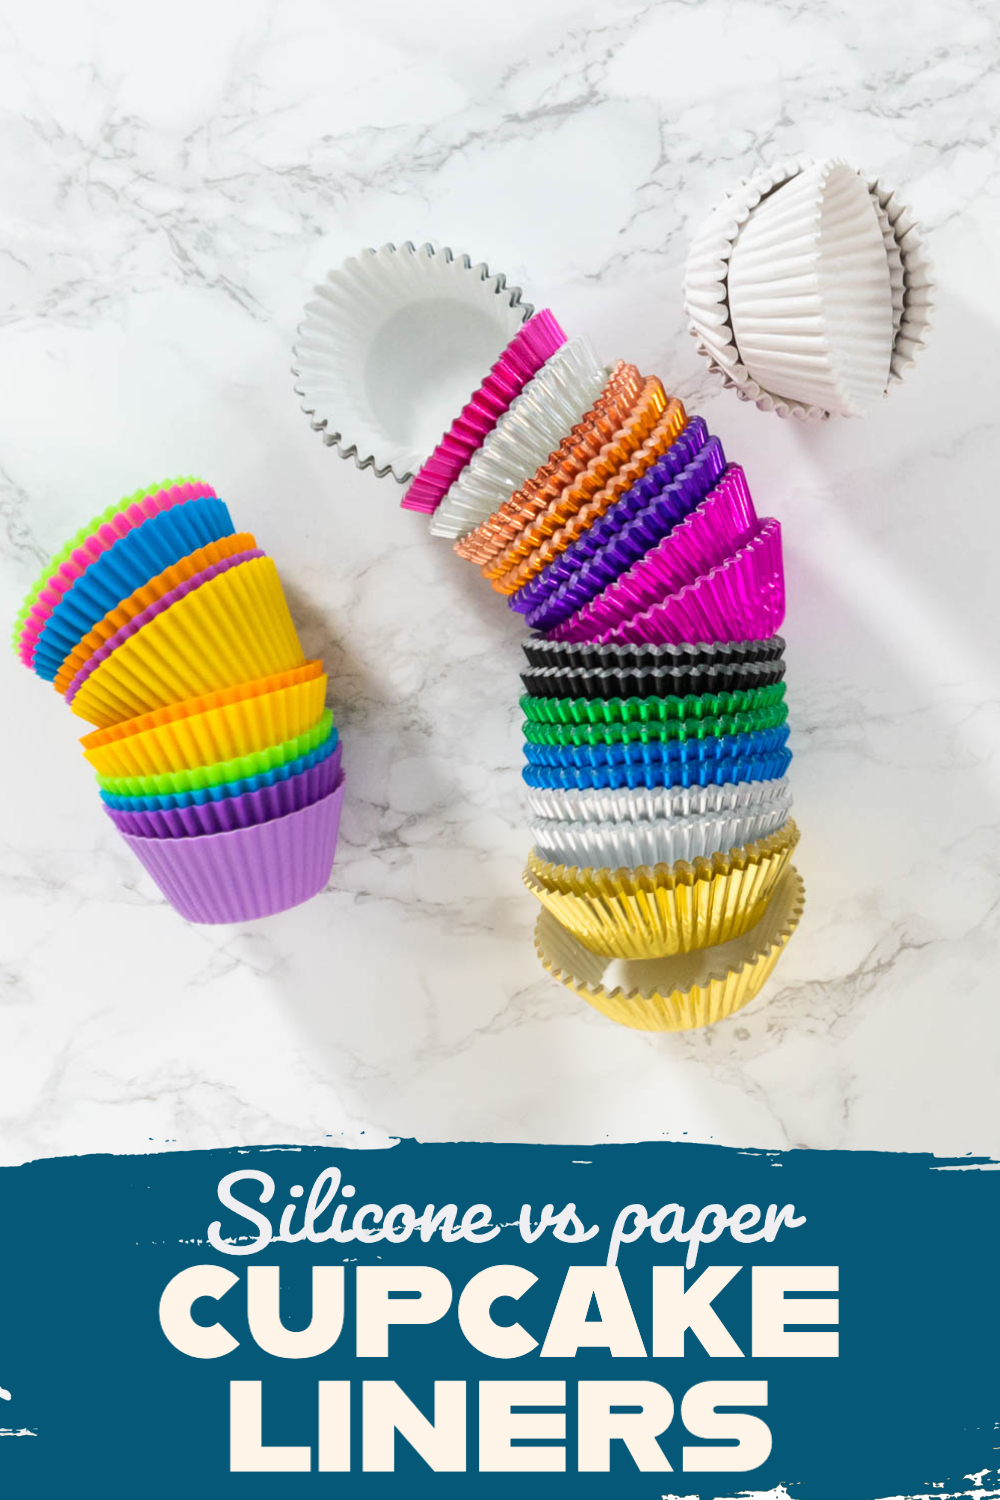 Silicone vs paper cupcake liners